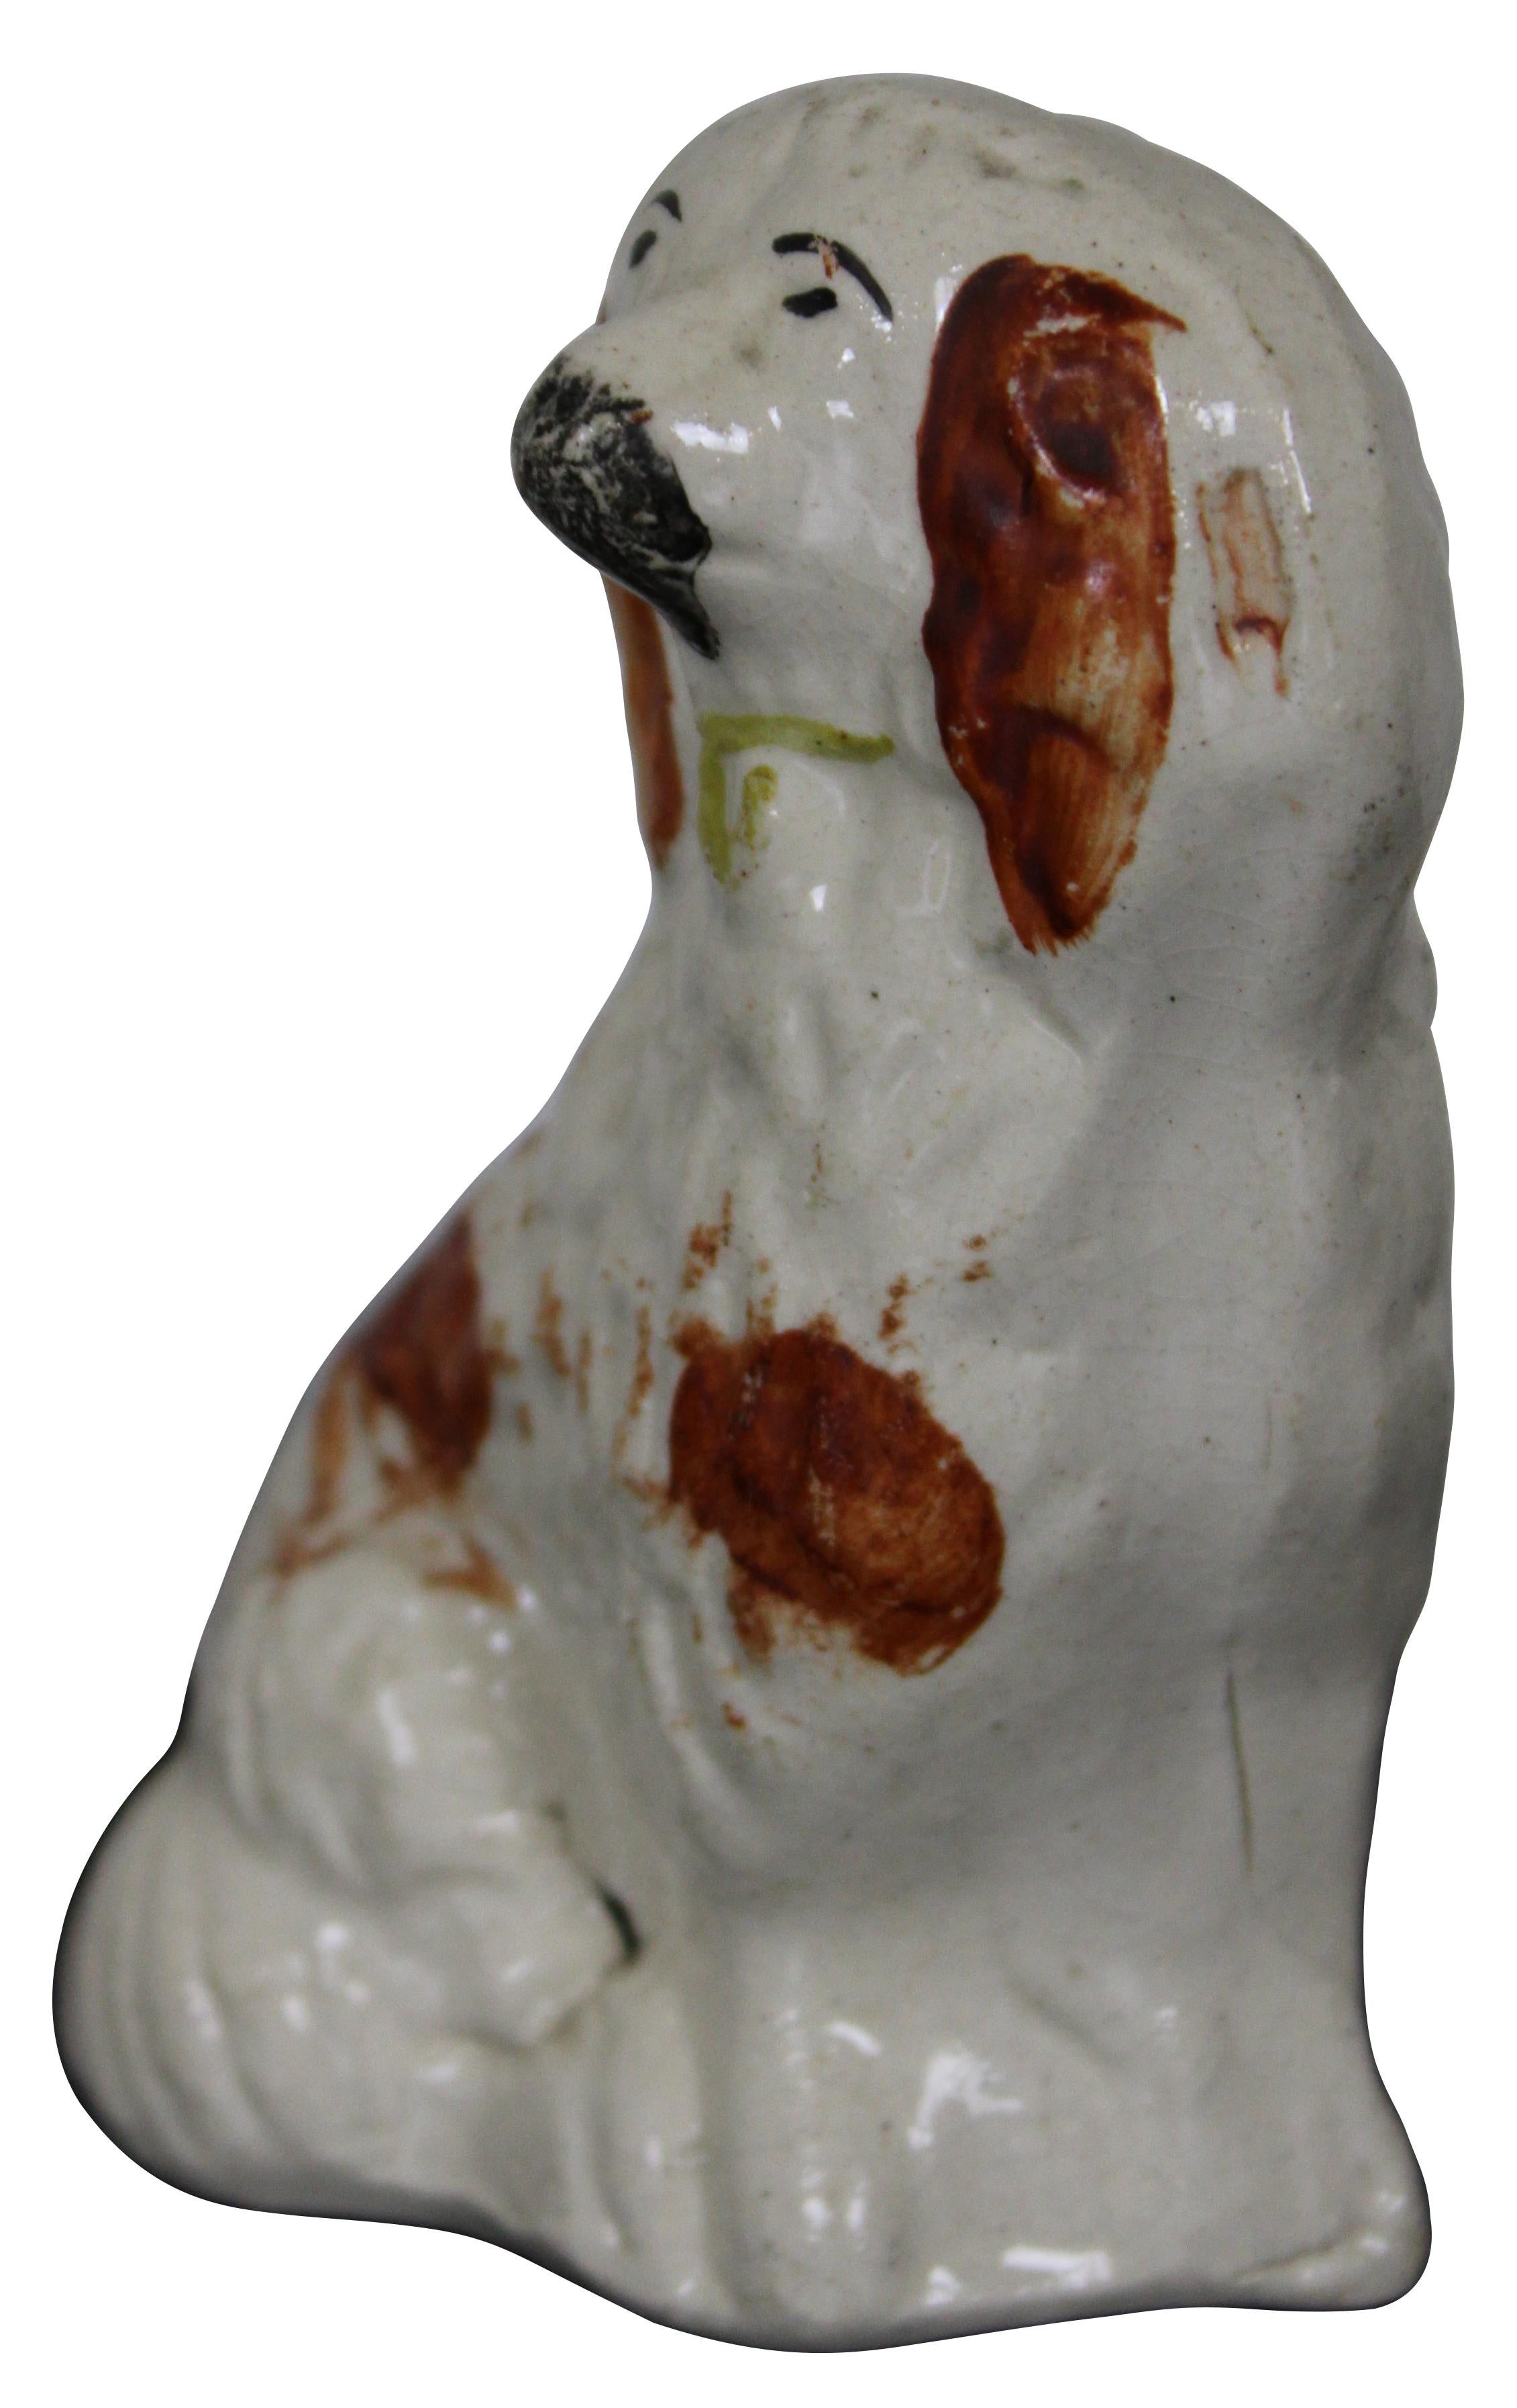 Antique miniature Staffordshire porcelain figurine in the shape of a red and white King Charles spaniel with gold collar.